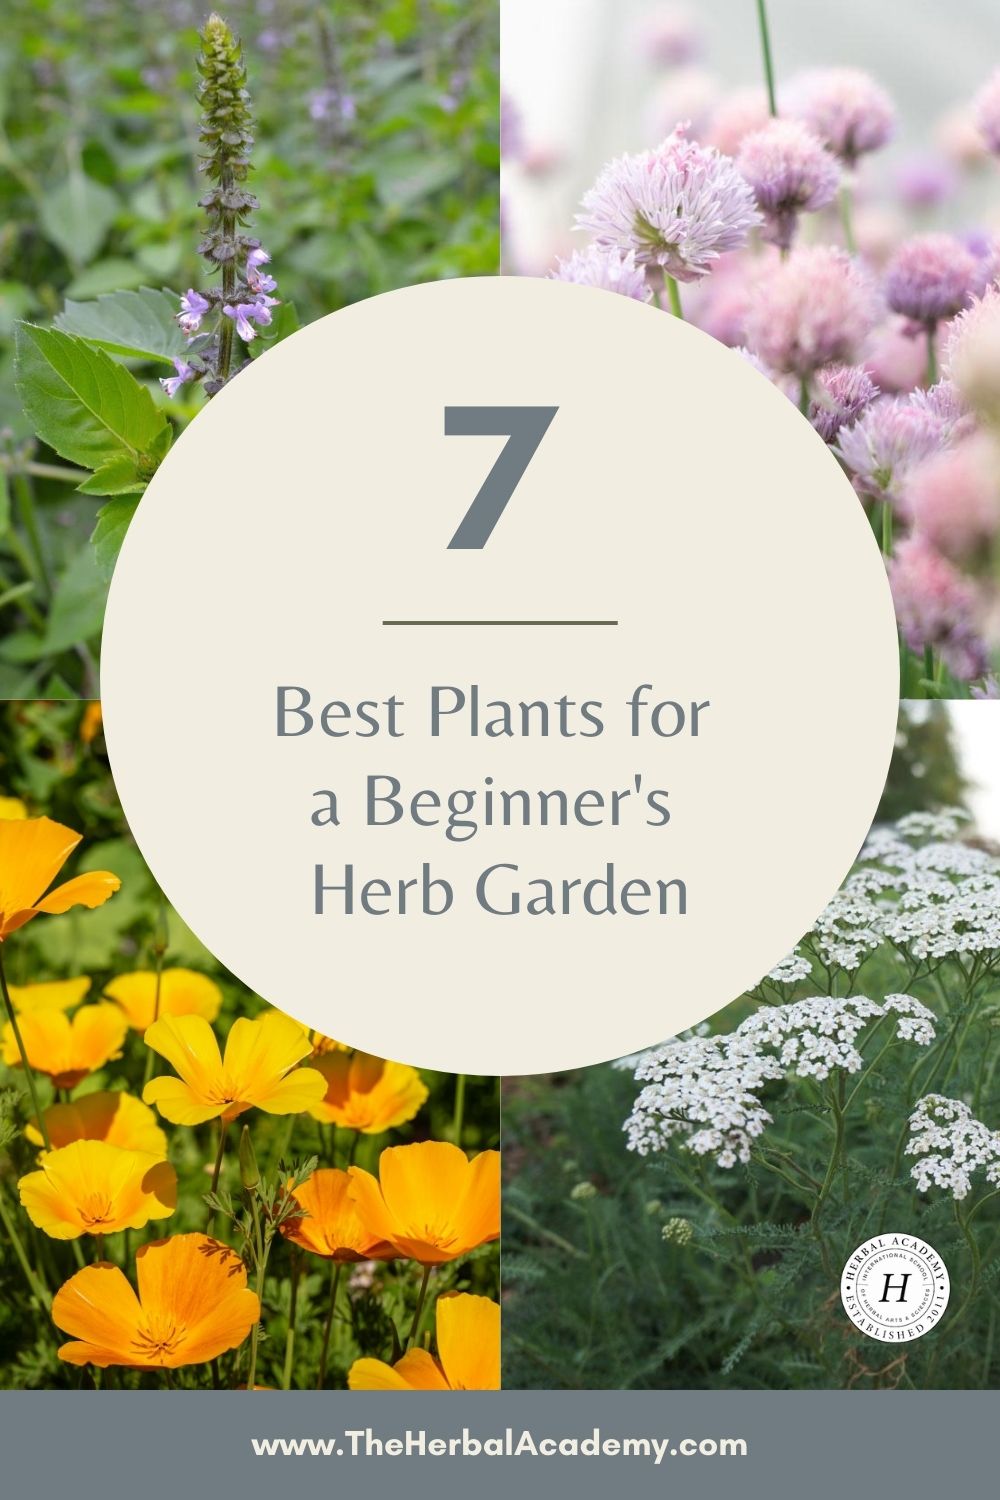 7 Best Plants for a Beginner's Herb Garden | Herbal Academy | In this article, we share seven easy-to-grow and useful herbs for a beginner’s herb garden, along with tips for using and growing each one. 